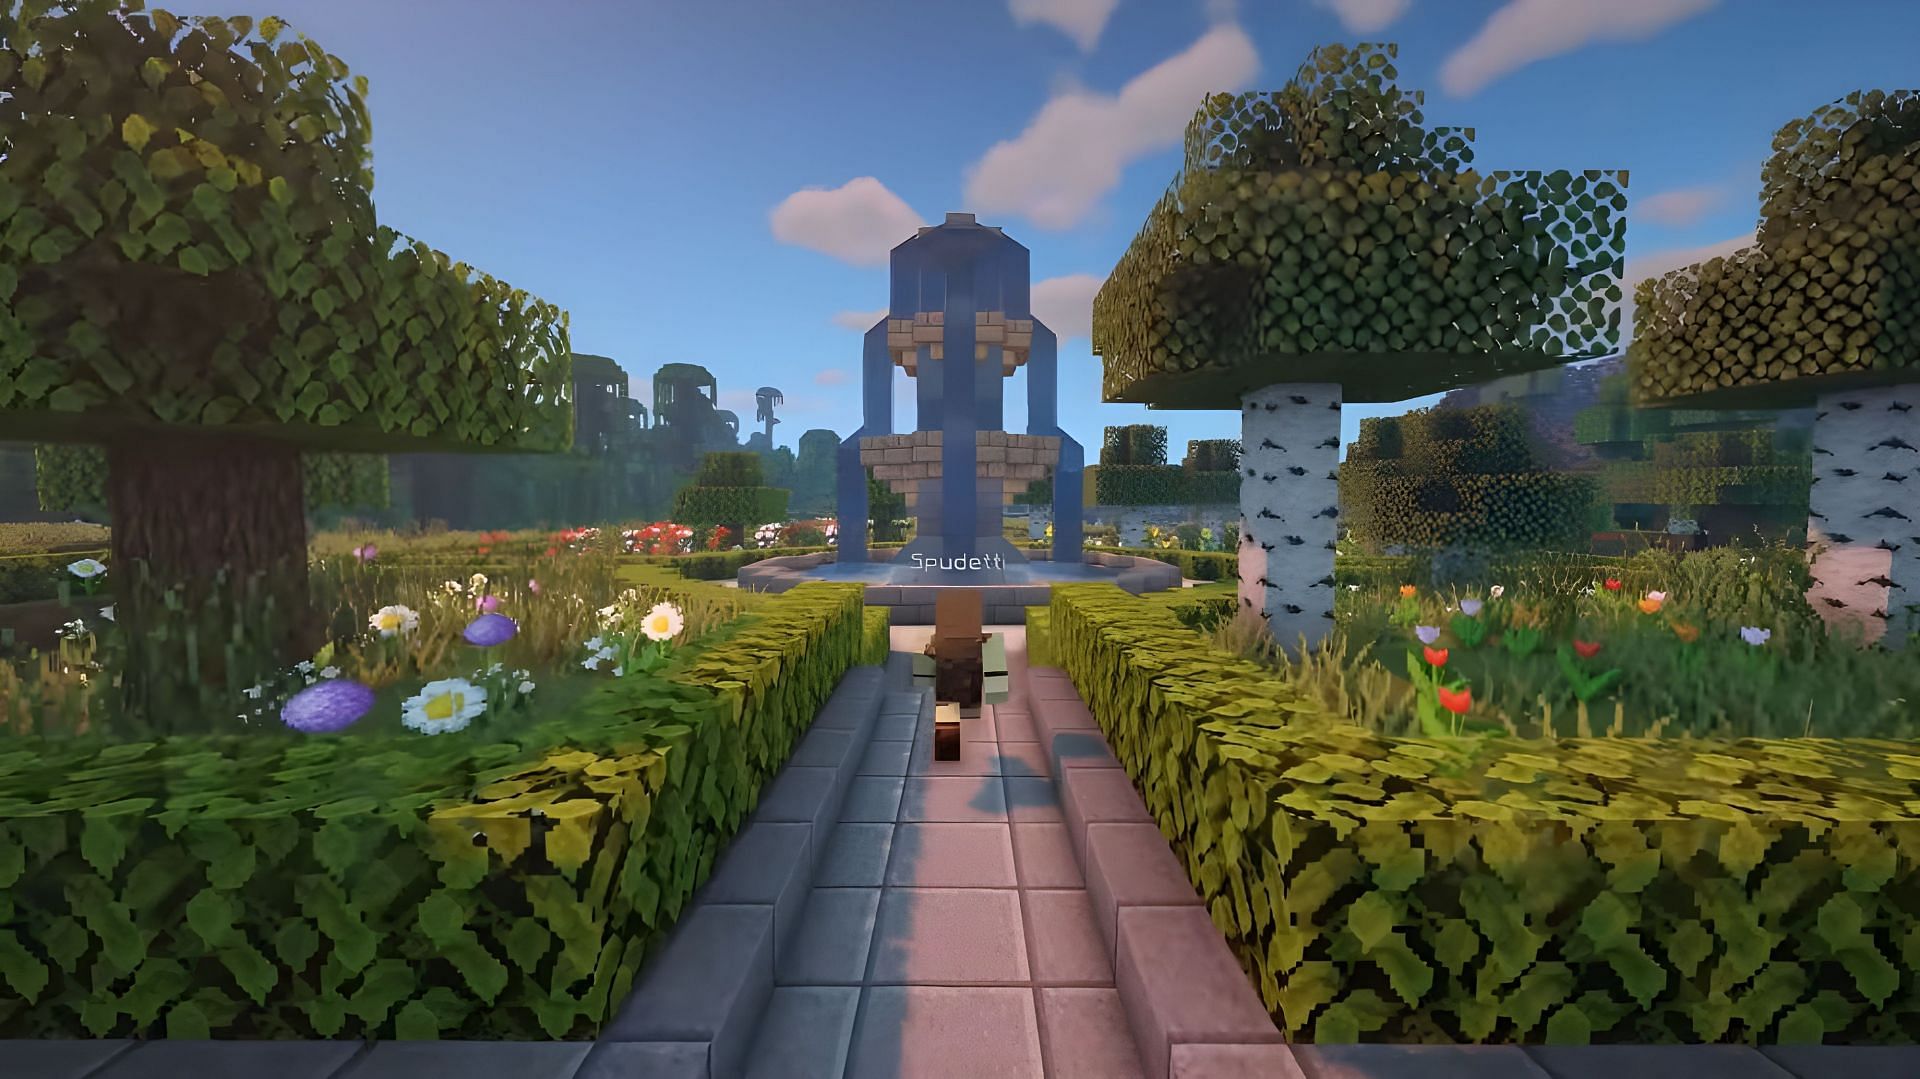 Fountain builds are beautifully created within Minecraft (Image via YouTube/Spudetti)